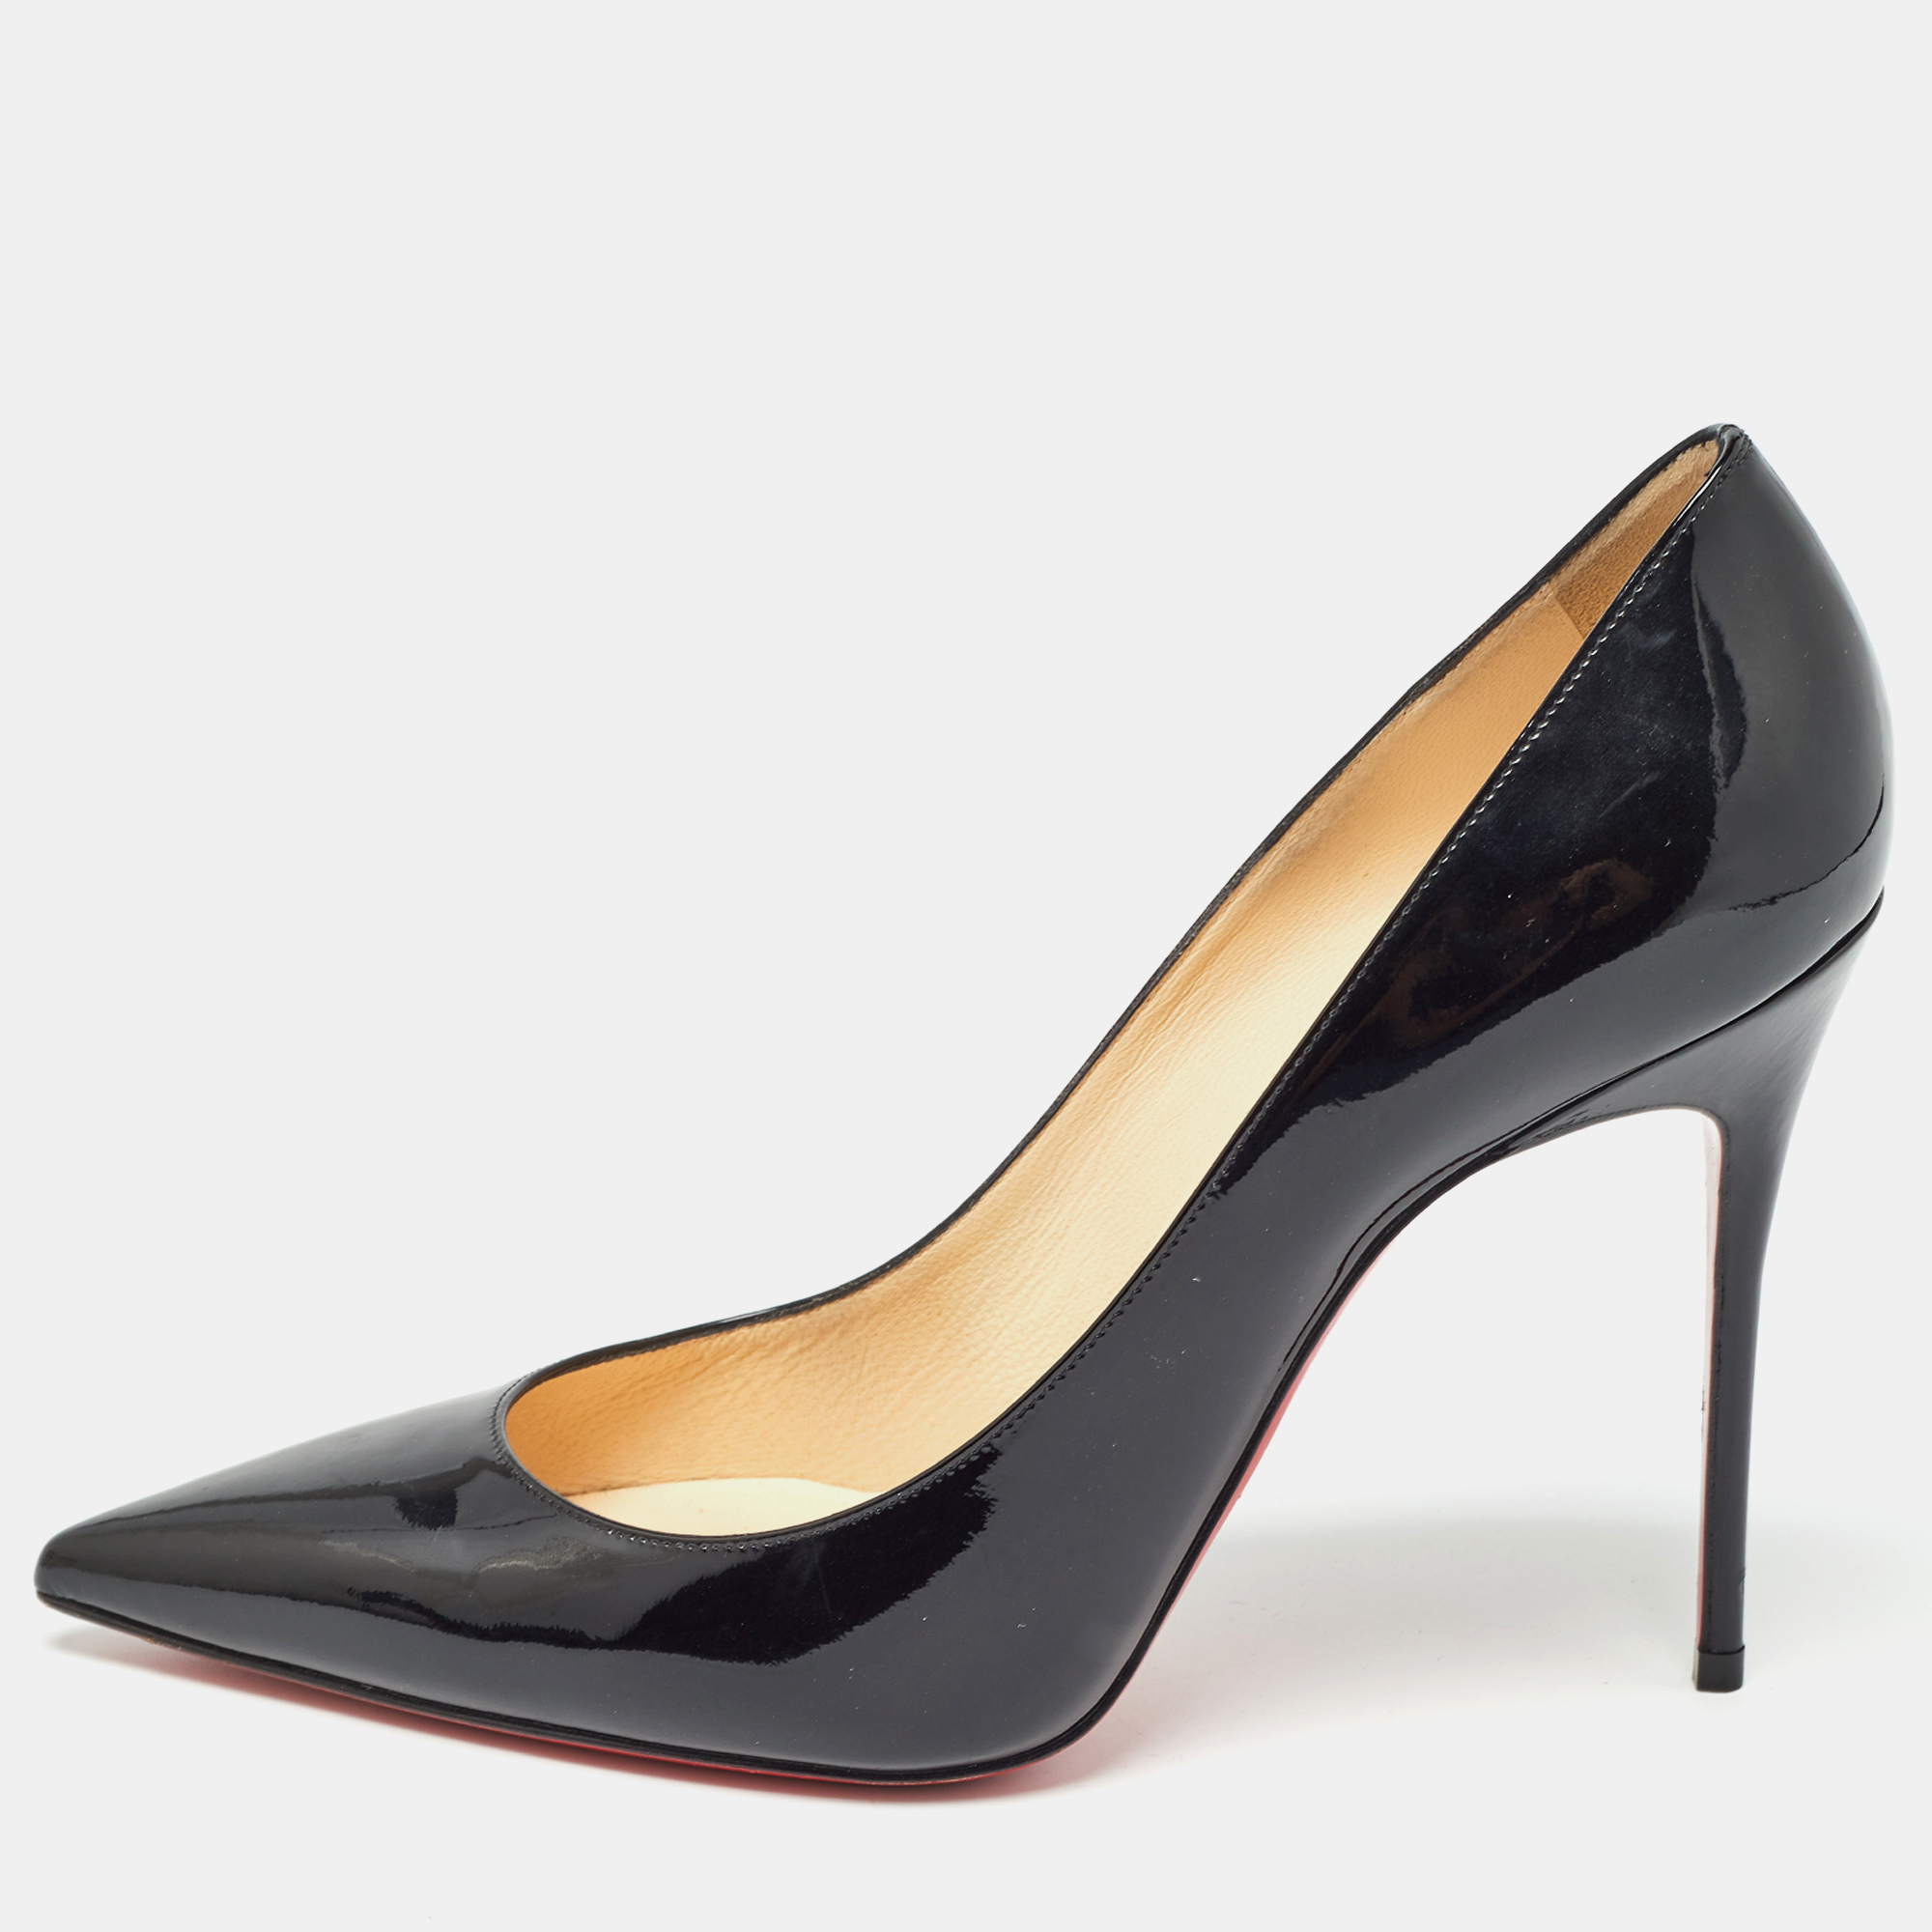 Christian louboutin black patent leather so kate pointed toe pumps size 40.5